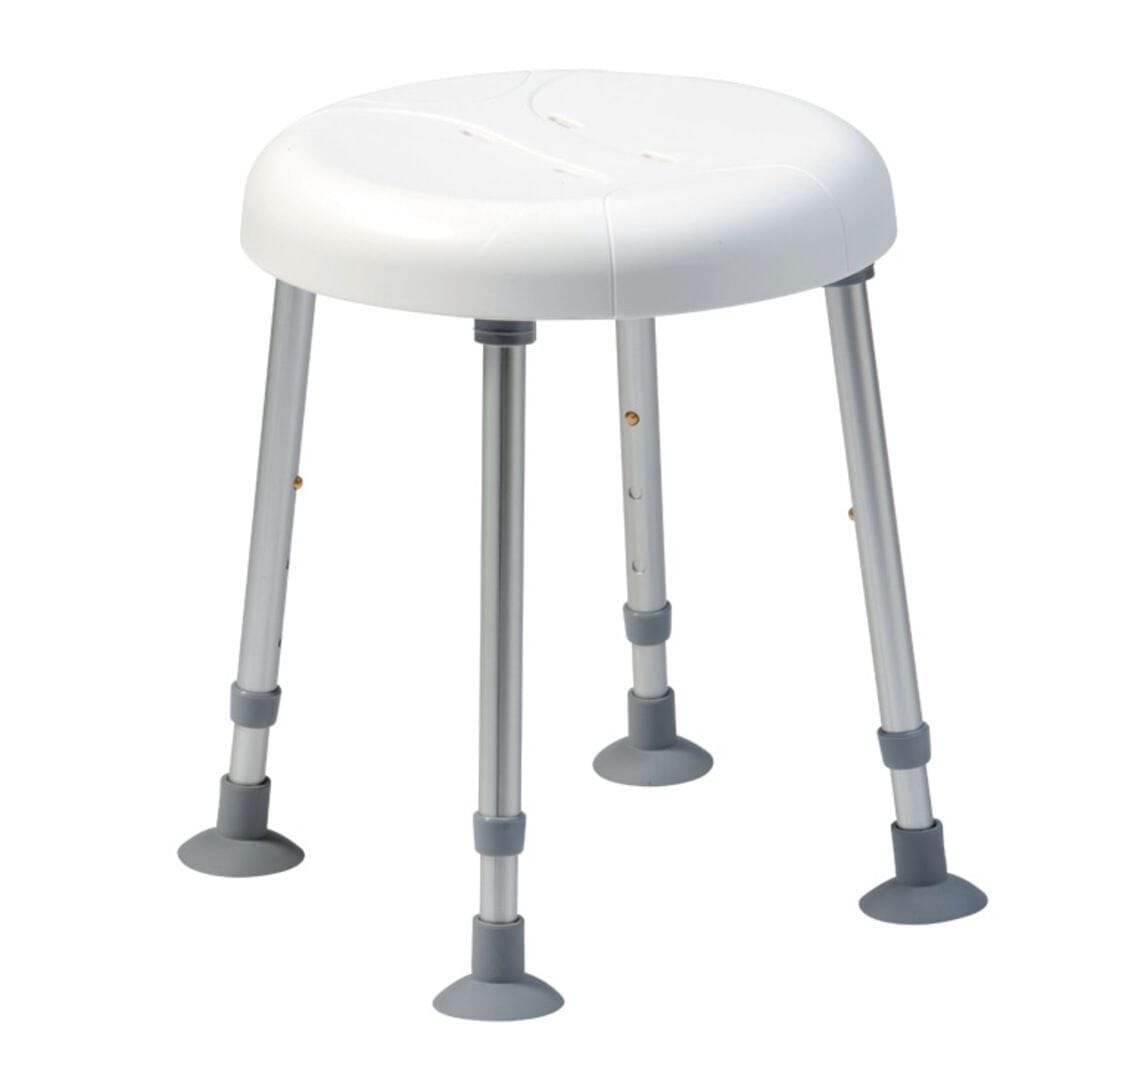 View Delphi Shower Stool Without Recess information